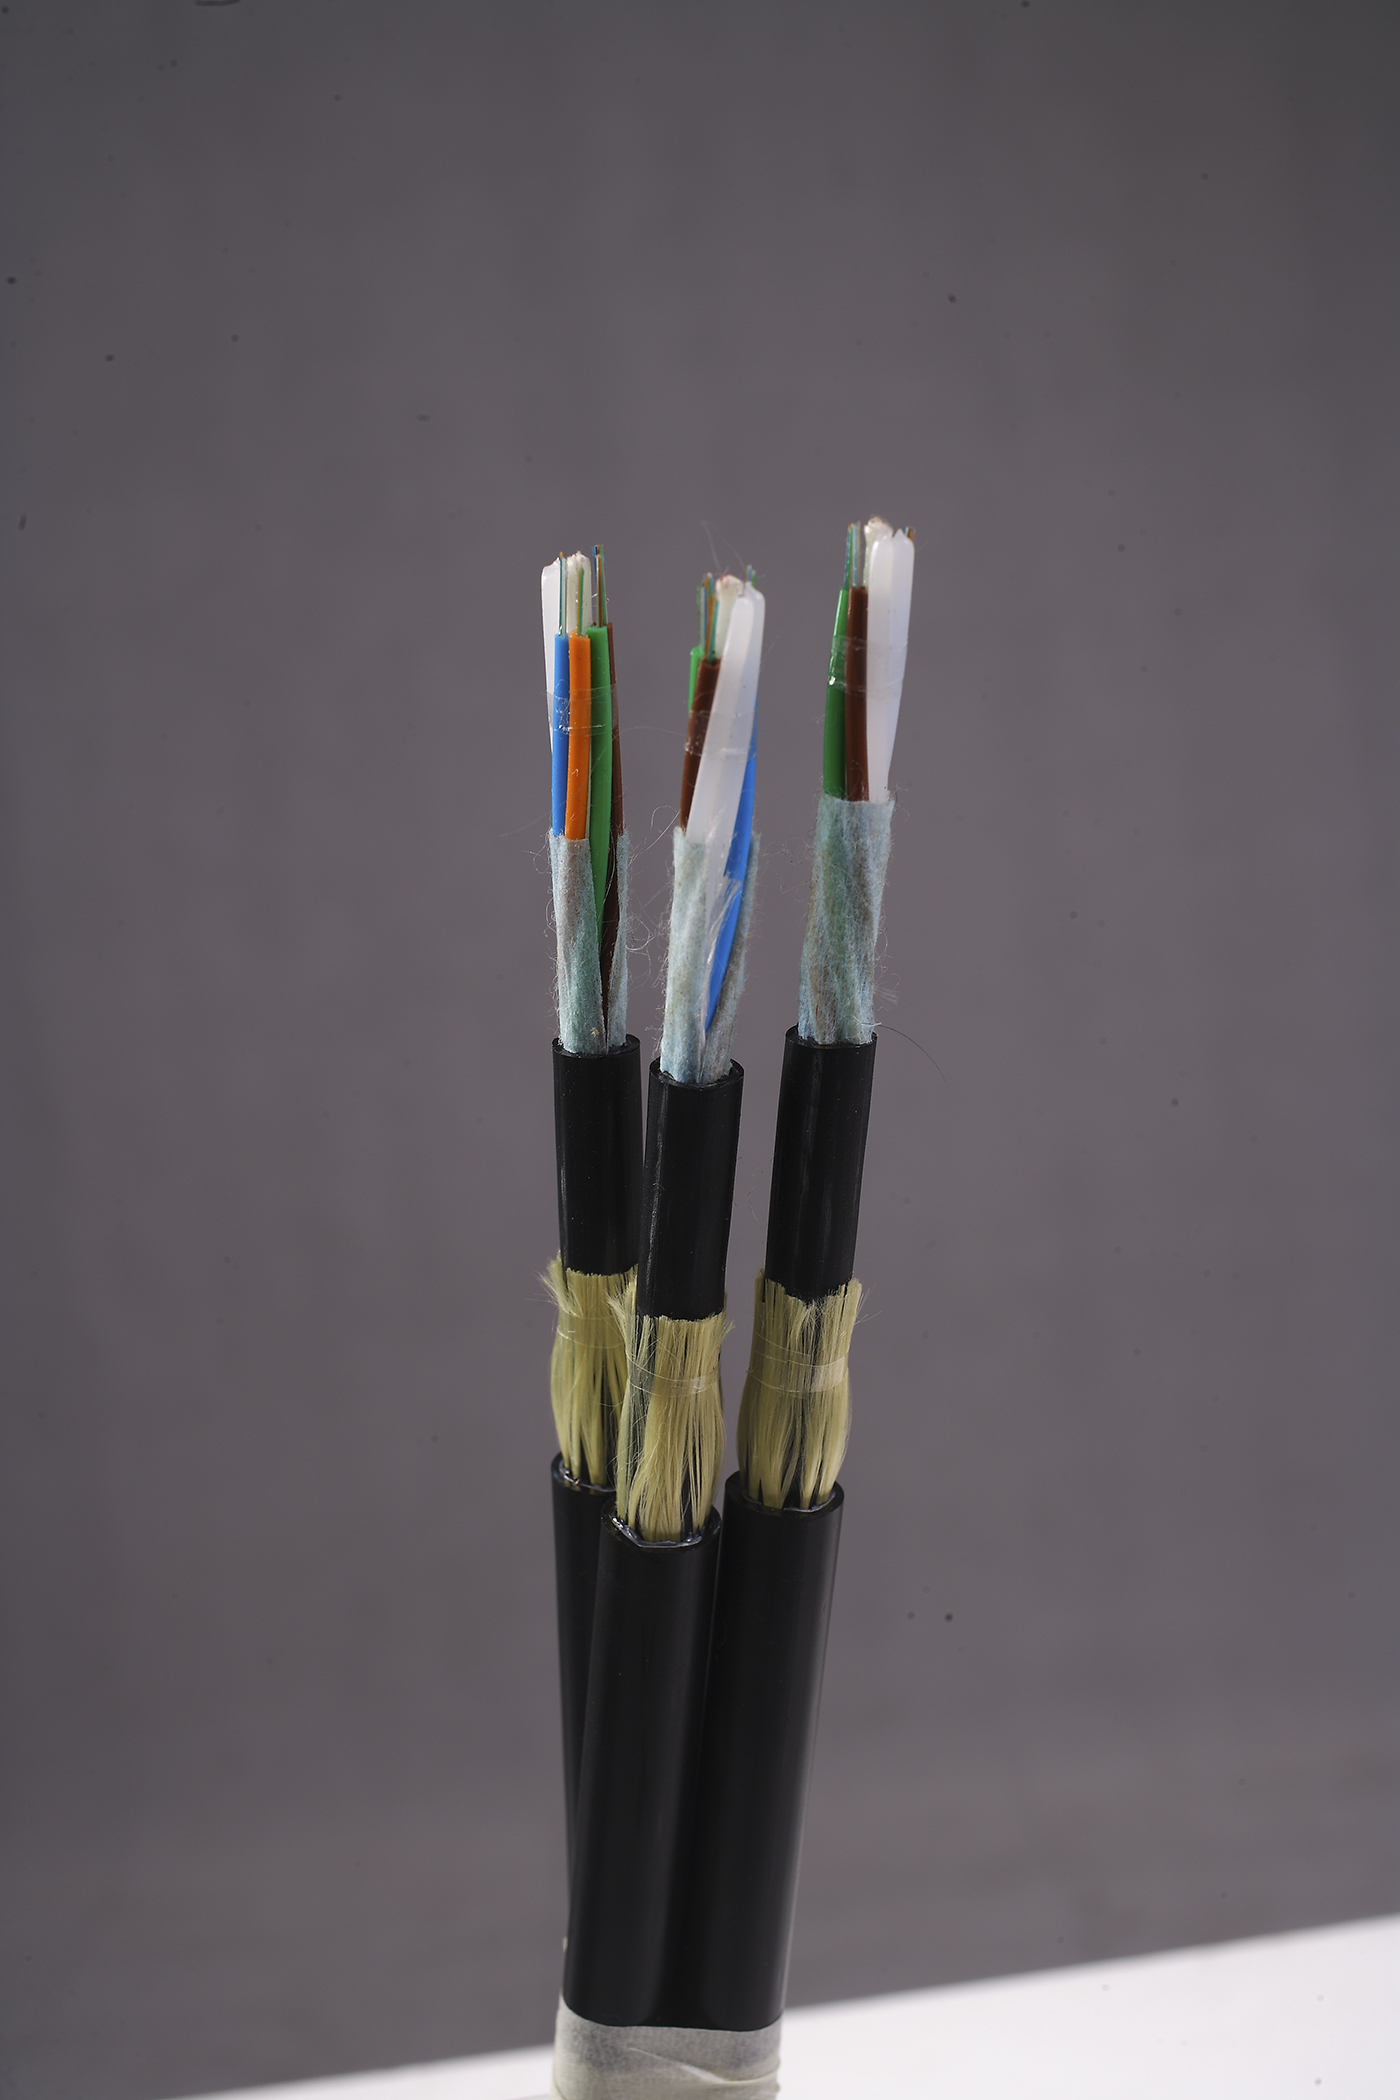 All dielectric self-supporting optical fiber cable (ADSS)